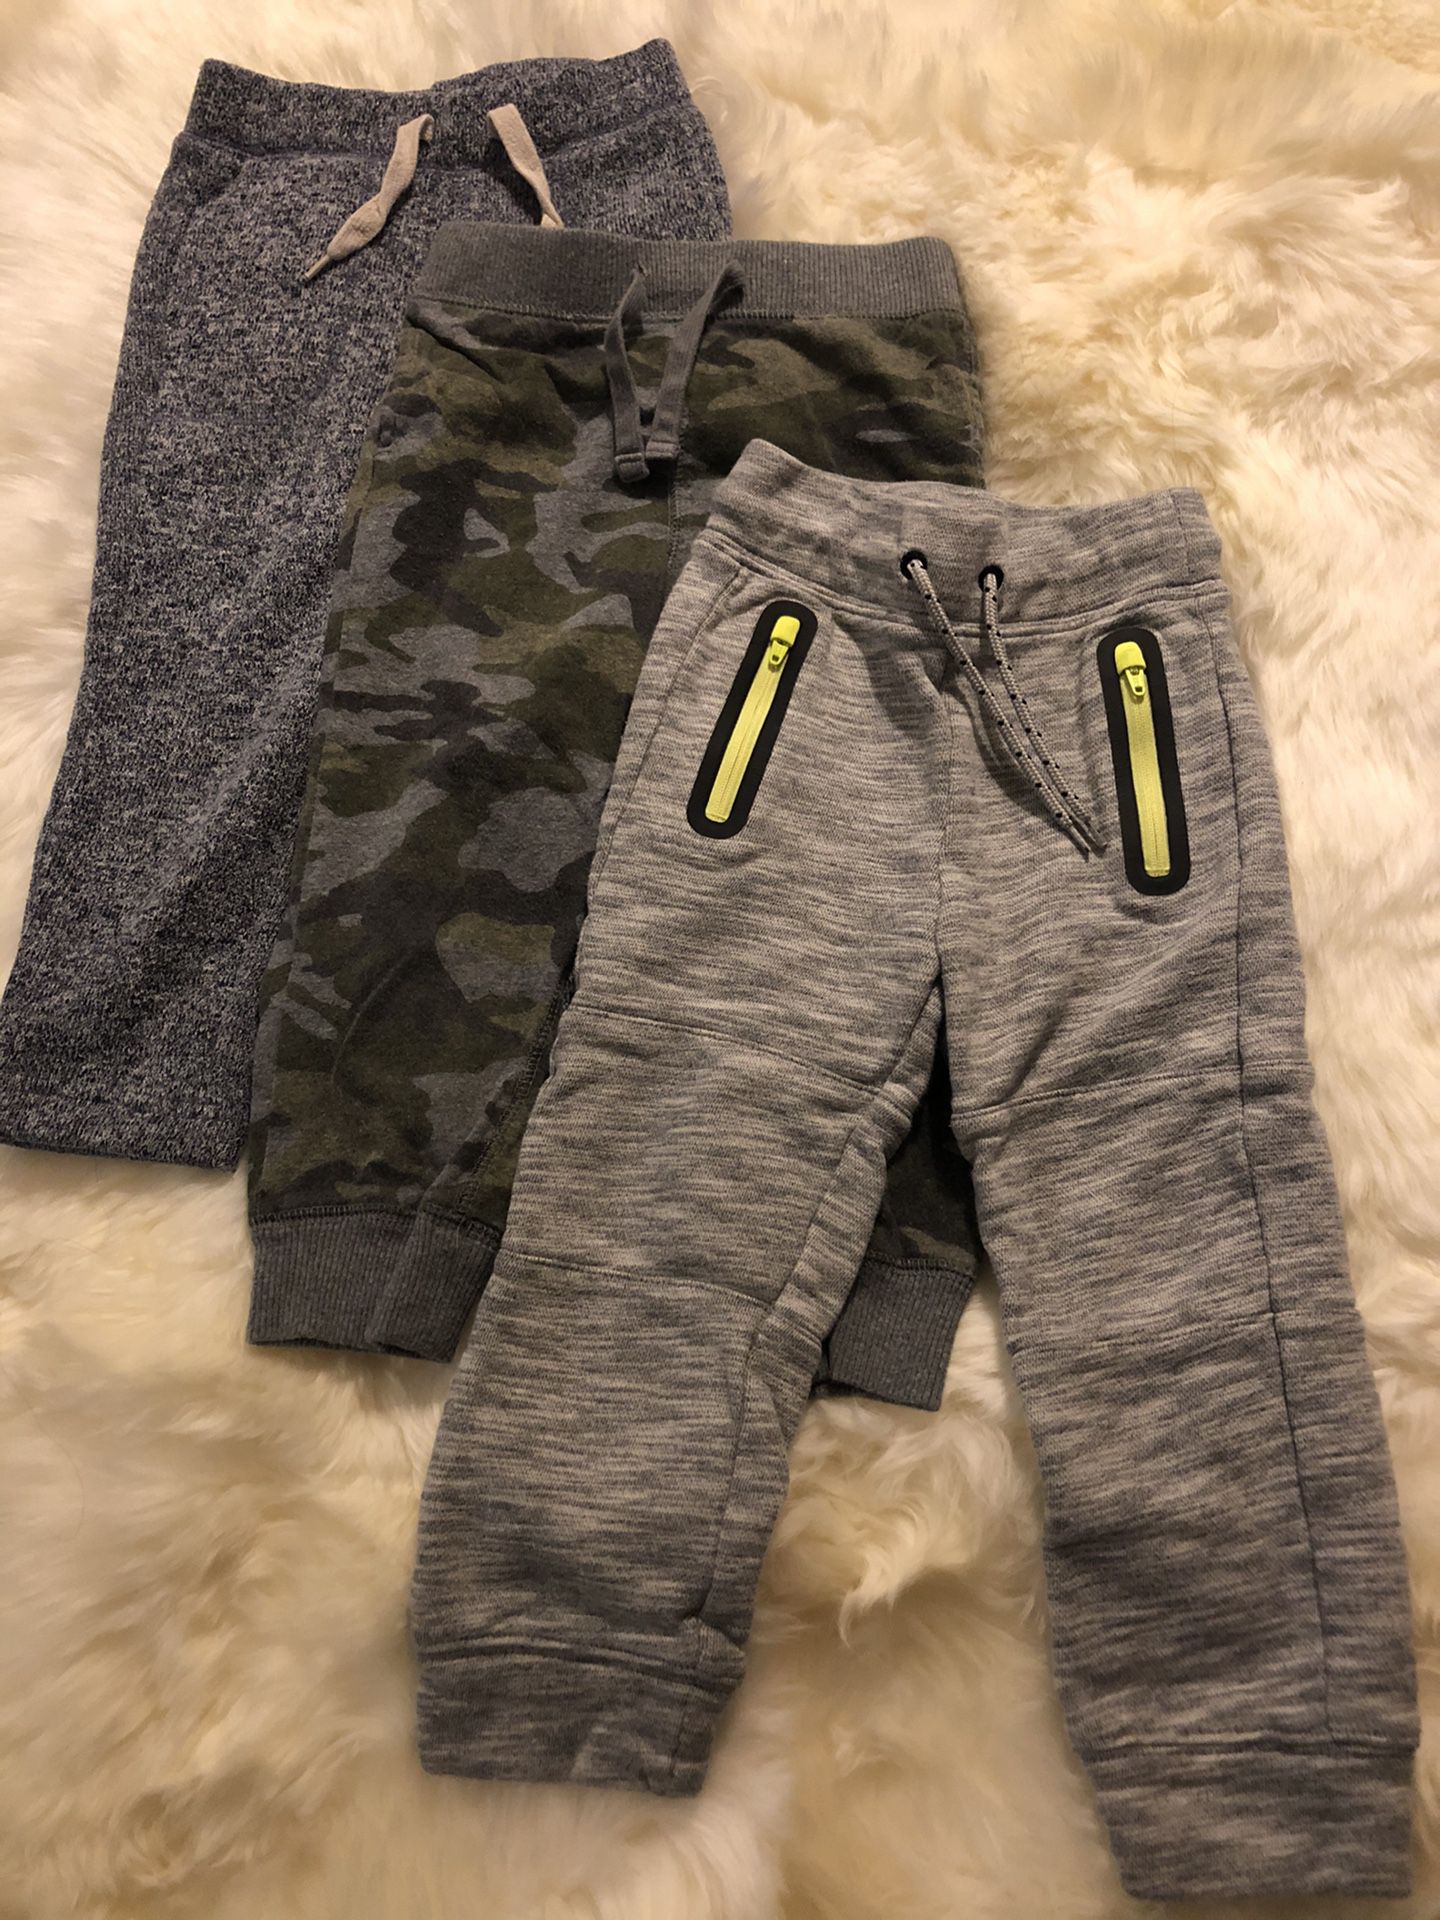 BabyGap joggers toddler size 3t